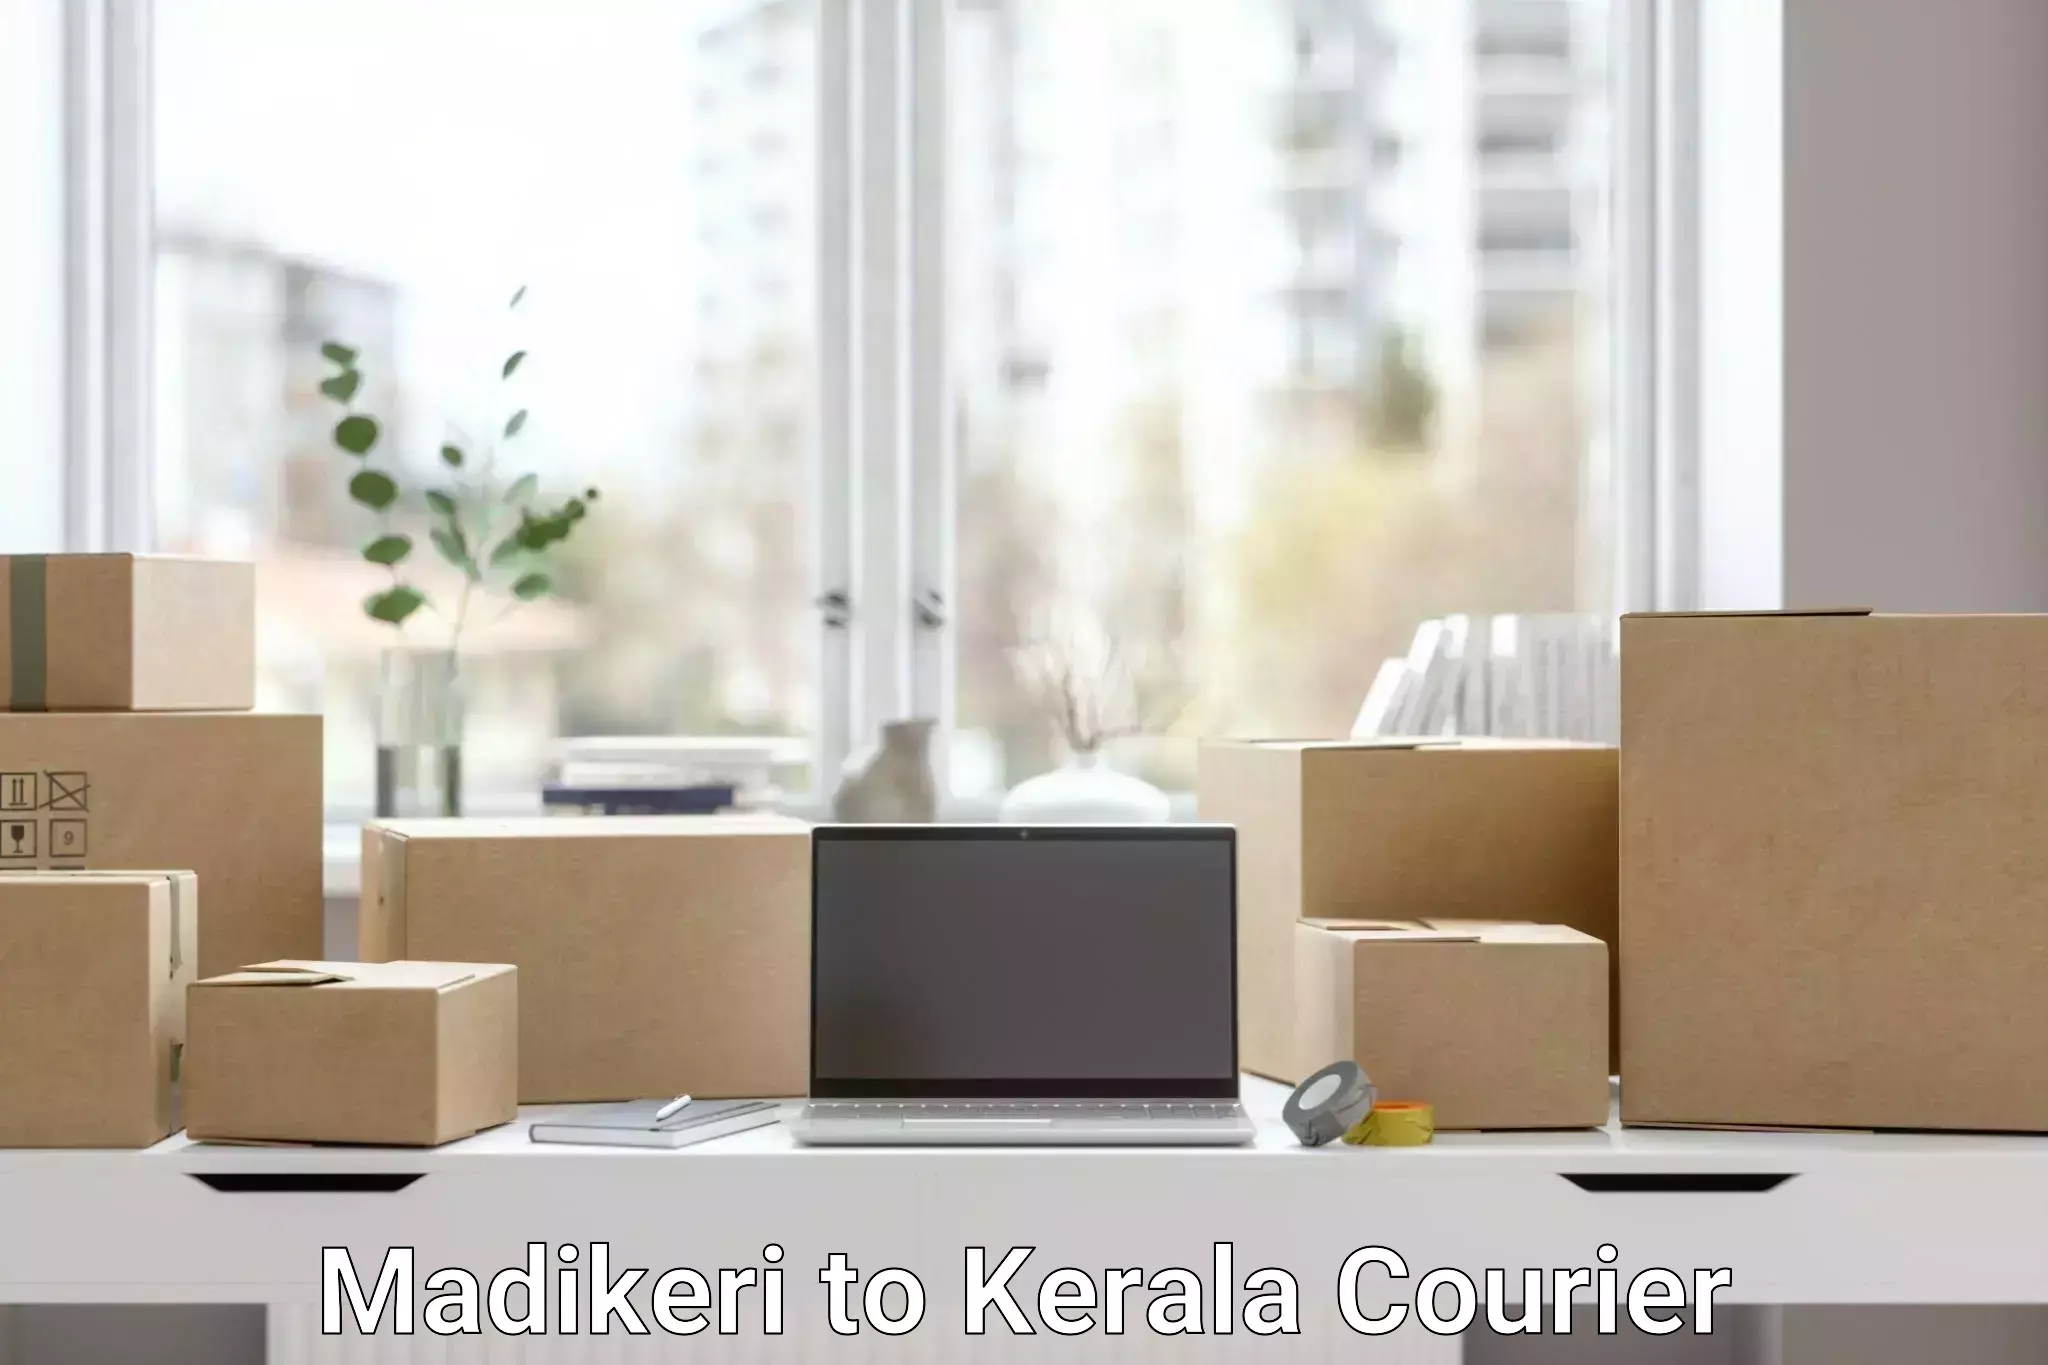 Local courier options Madikeri to Kozhikode